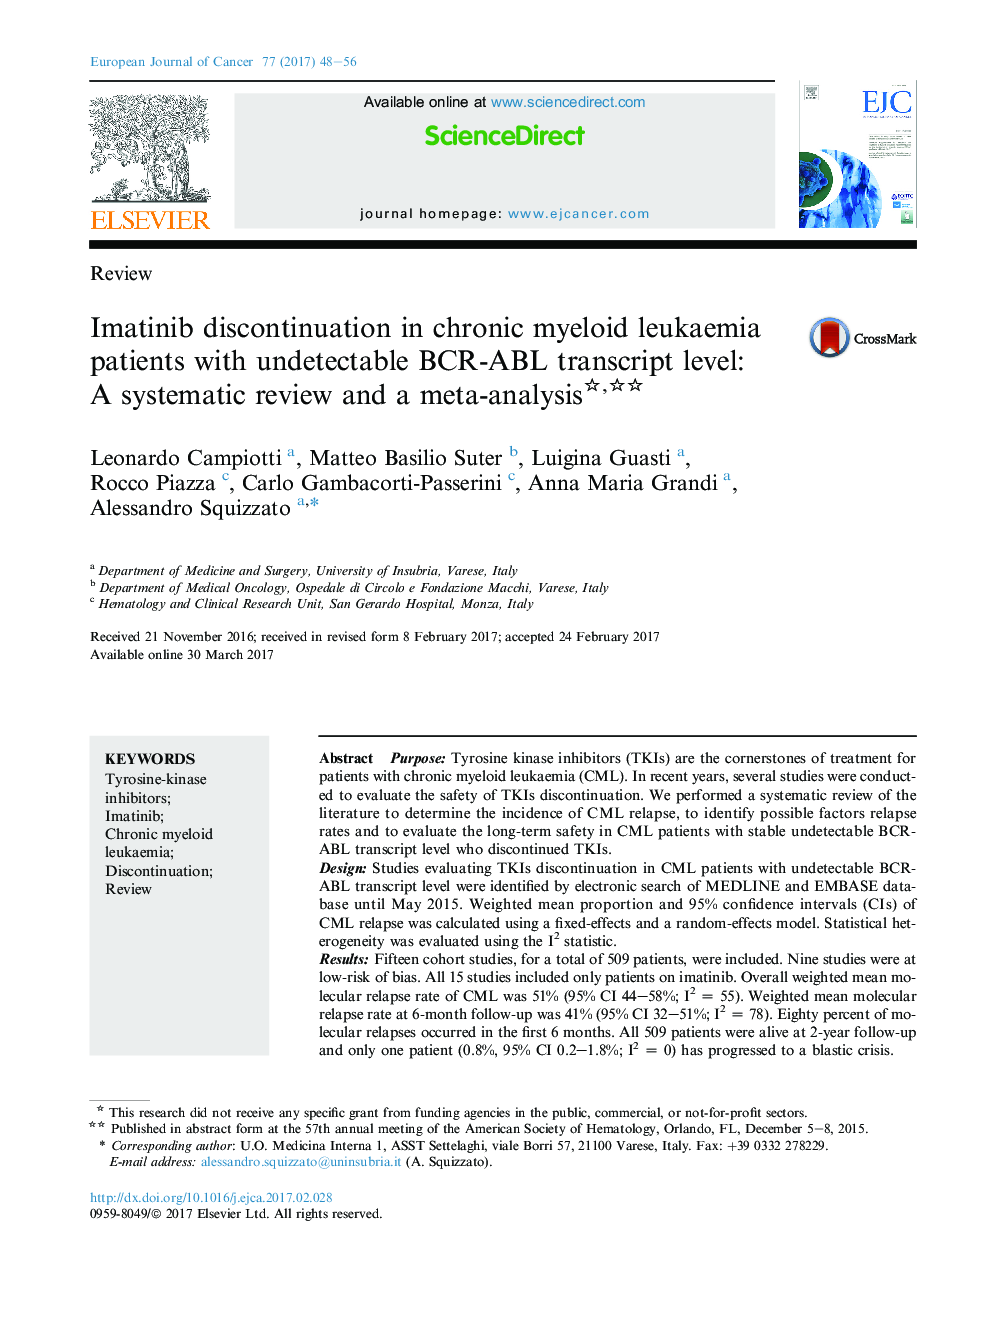 ReviewImatinib discontinuation in chronic myeloid leukaemia patients with undetectable BCR-ABL transcript level: AÂ systematic review and a meta-analysis